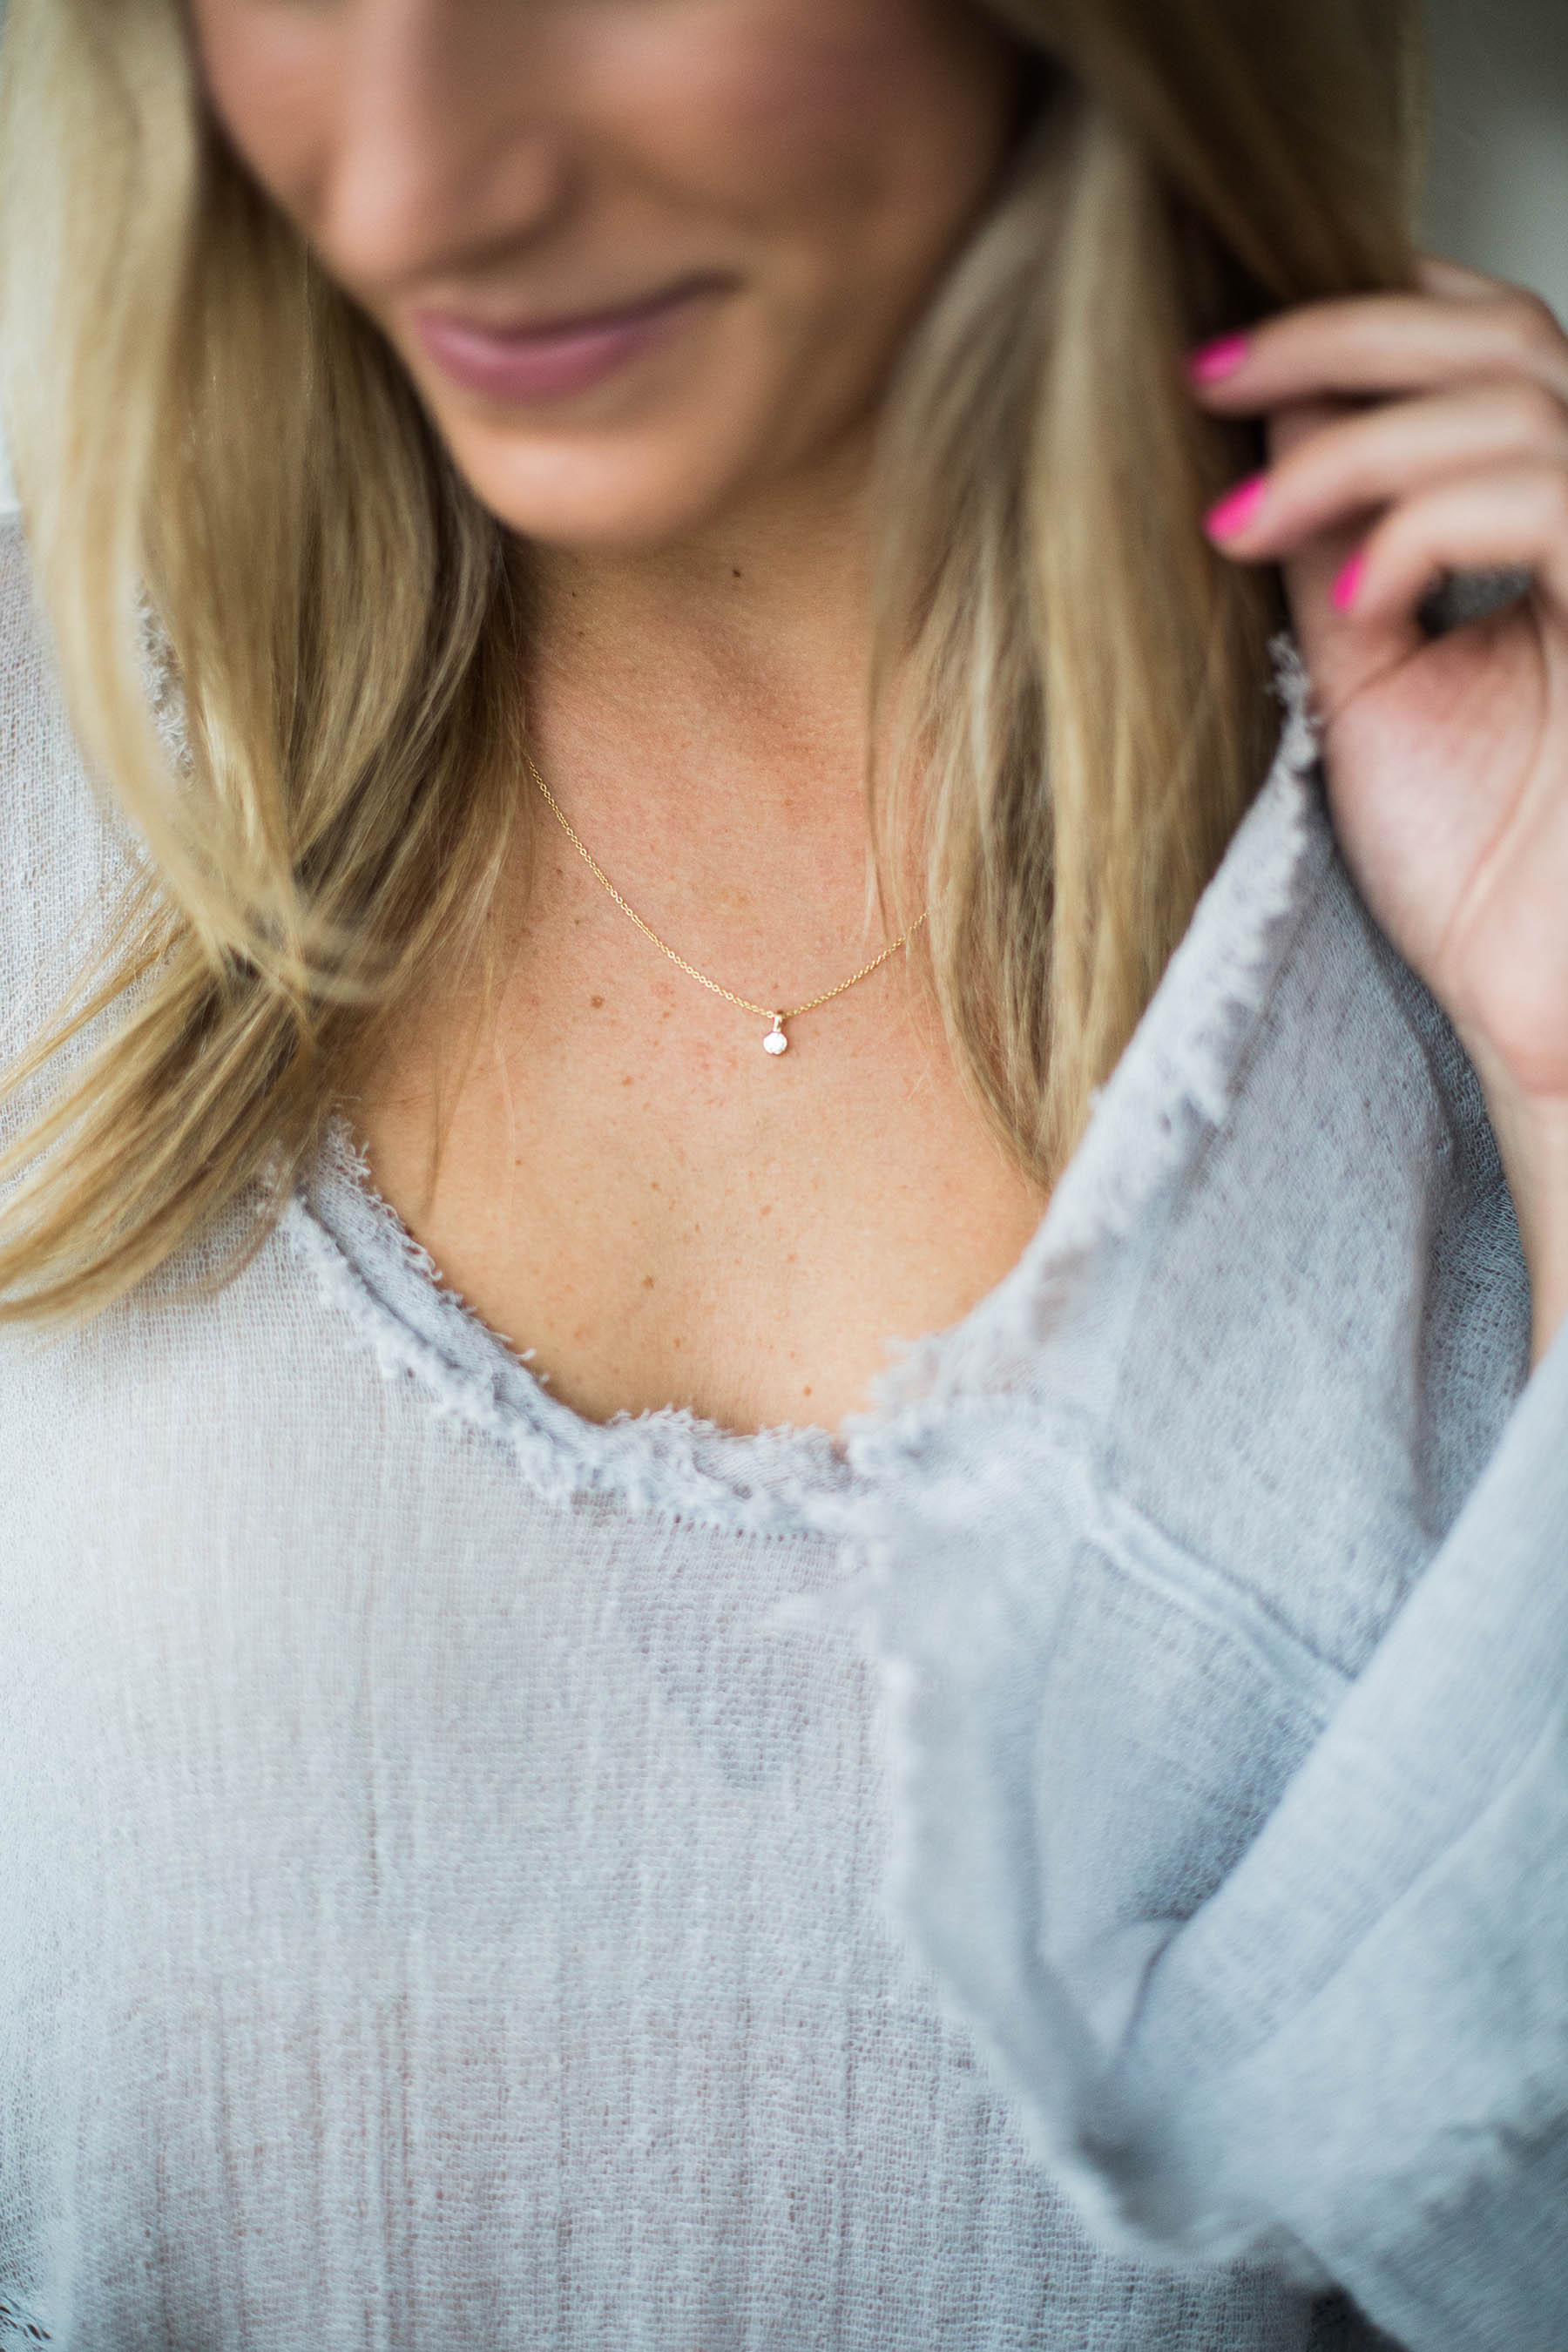 Amanda Holstein in diamond necklace from Diamond Foundry and Free People shirt